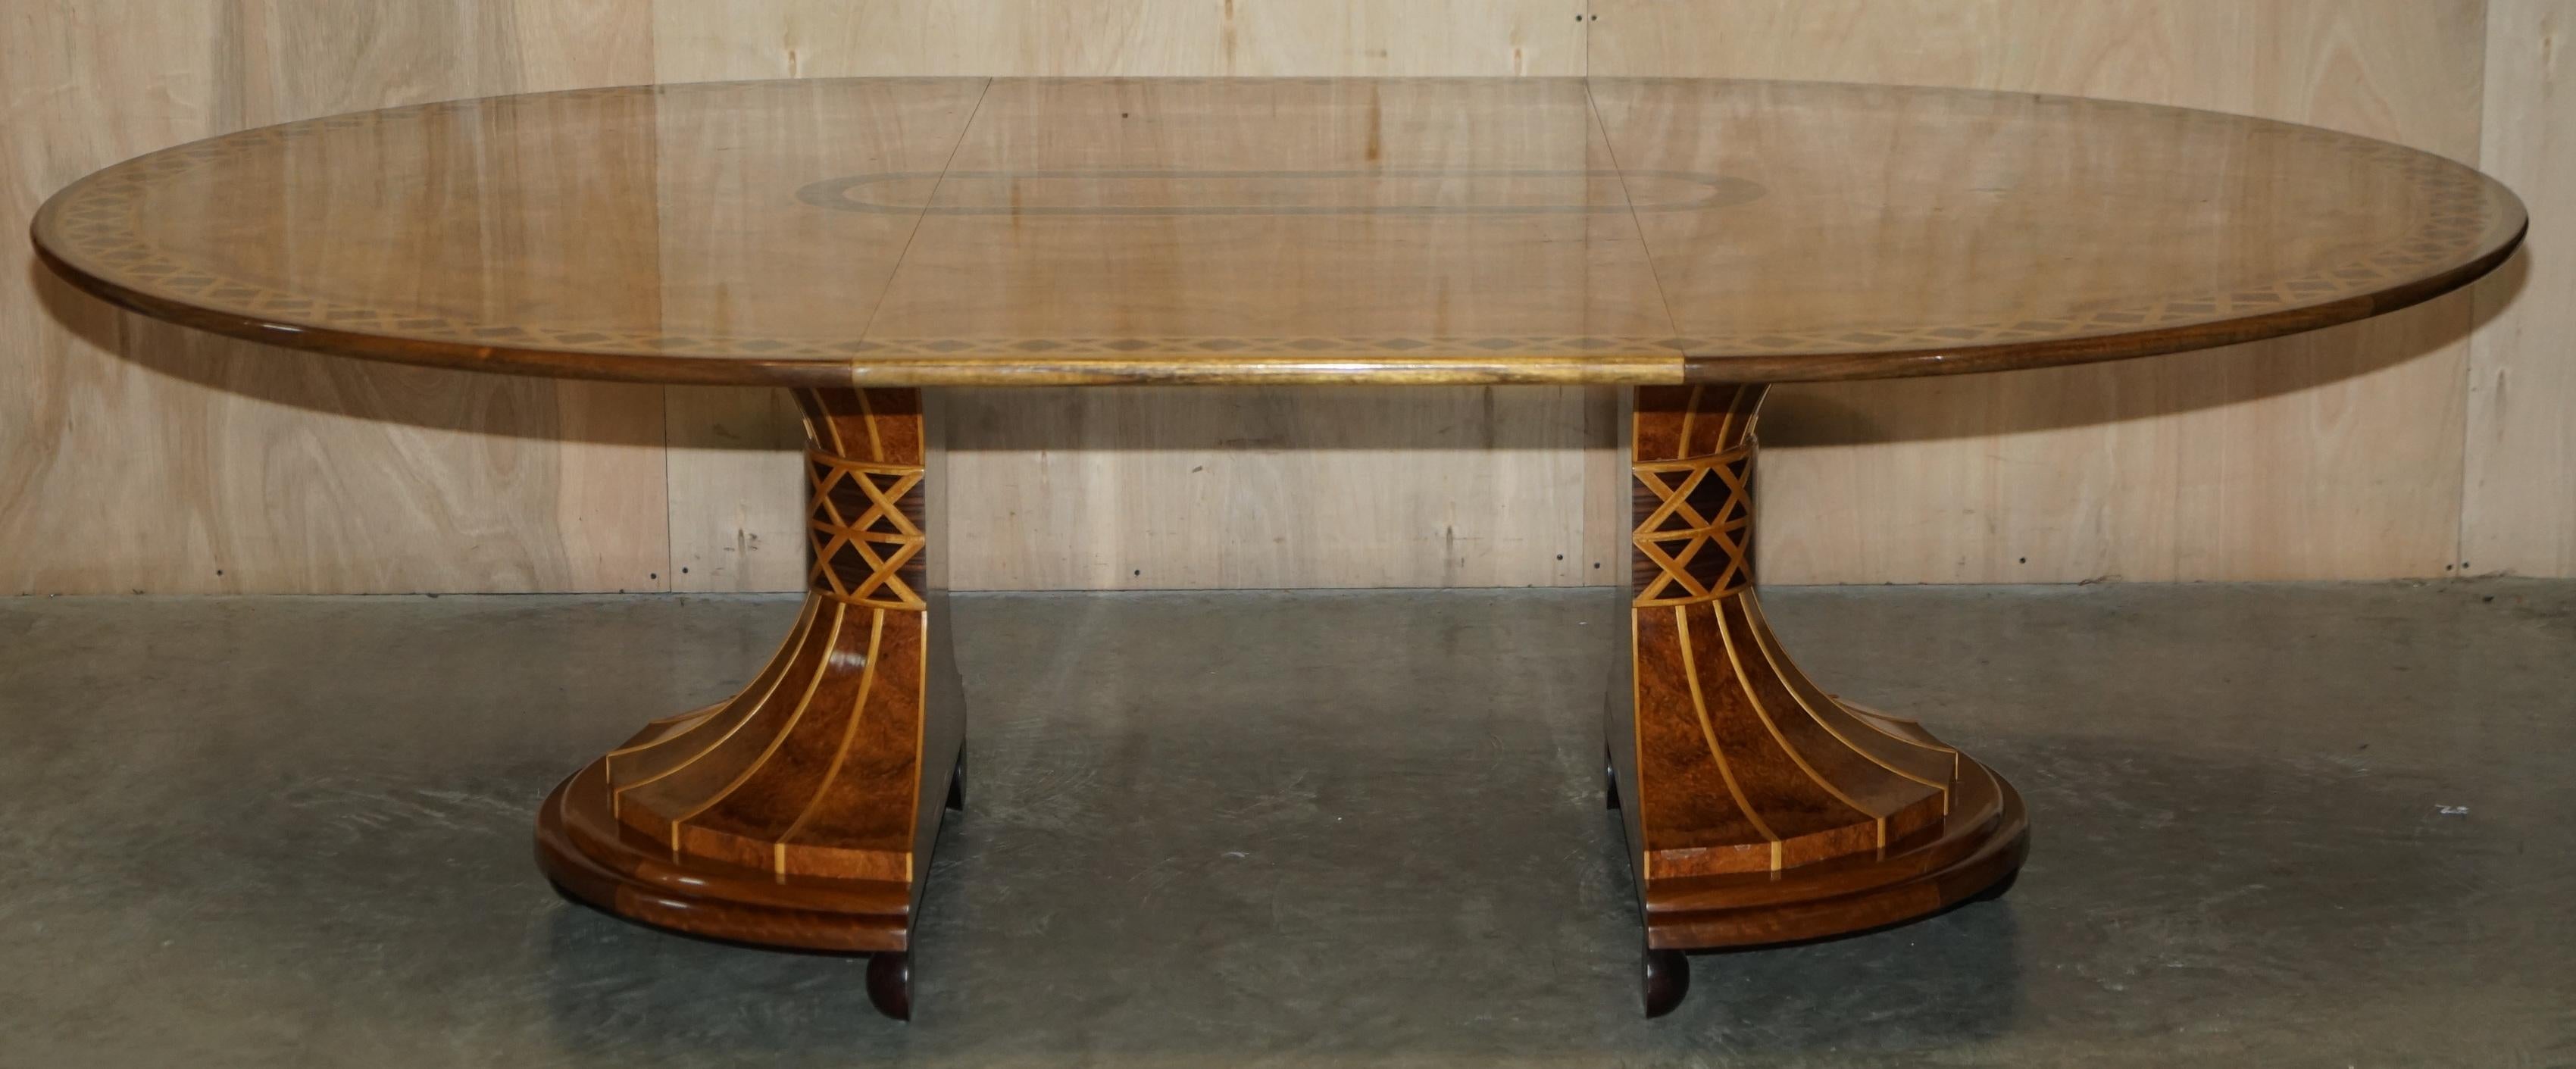 David Linley Custom Commission Round to Oval Extending Dining Table 6